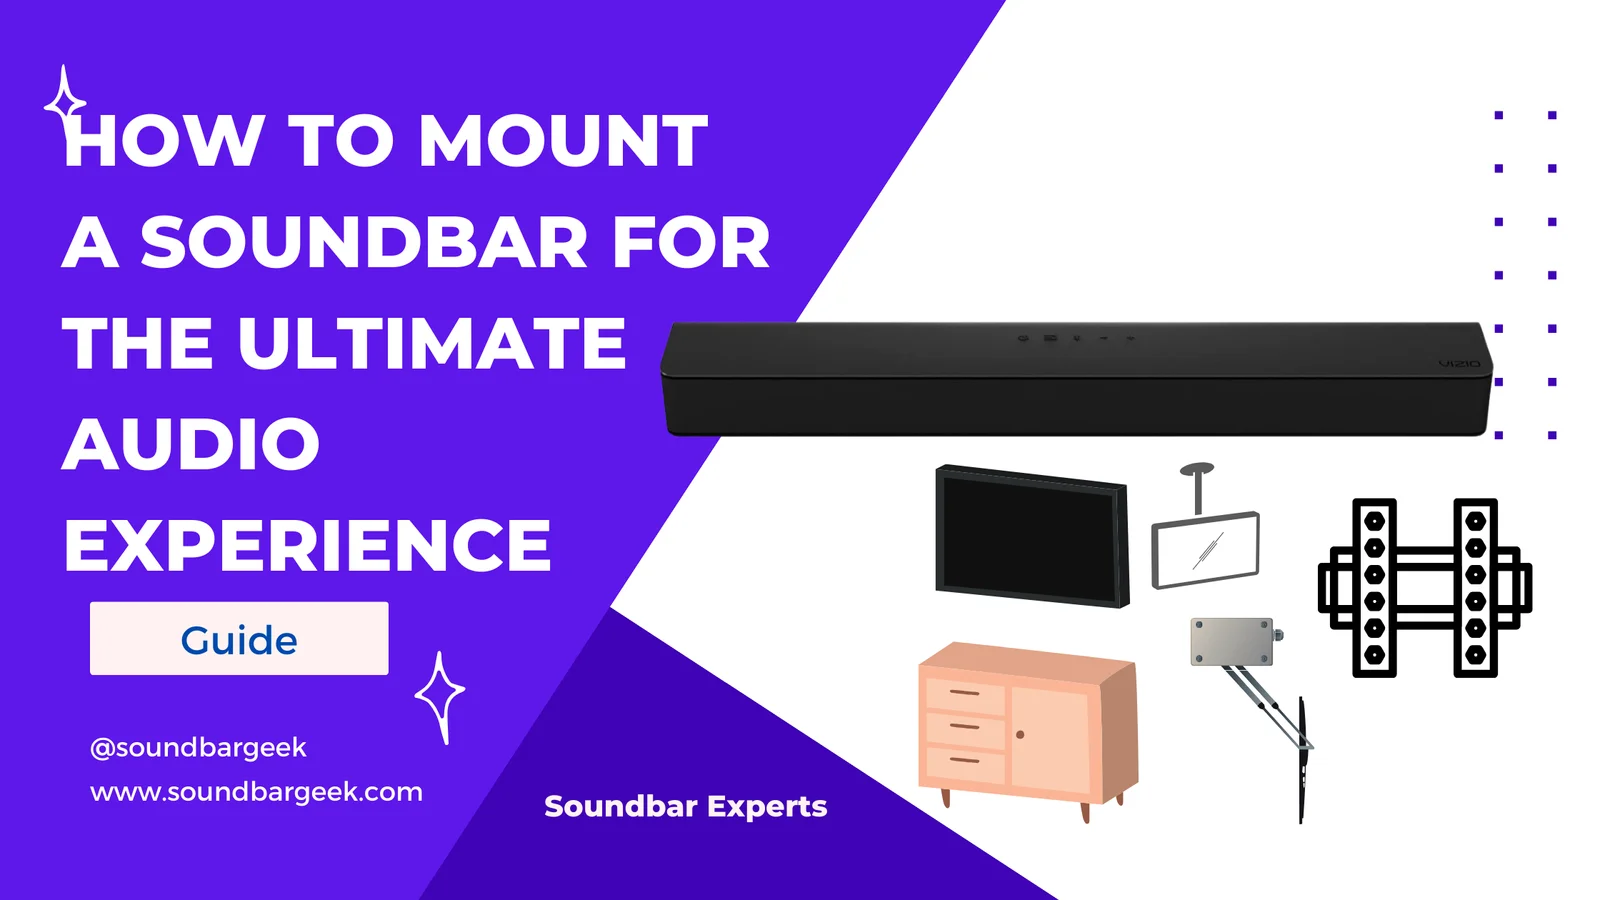 How to Mount a Soundbar for the Ultimate Audio Experience